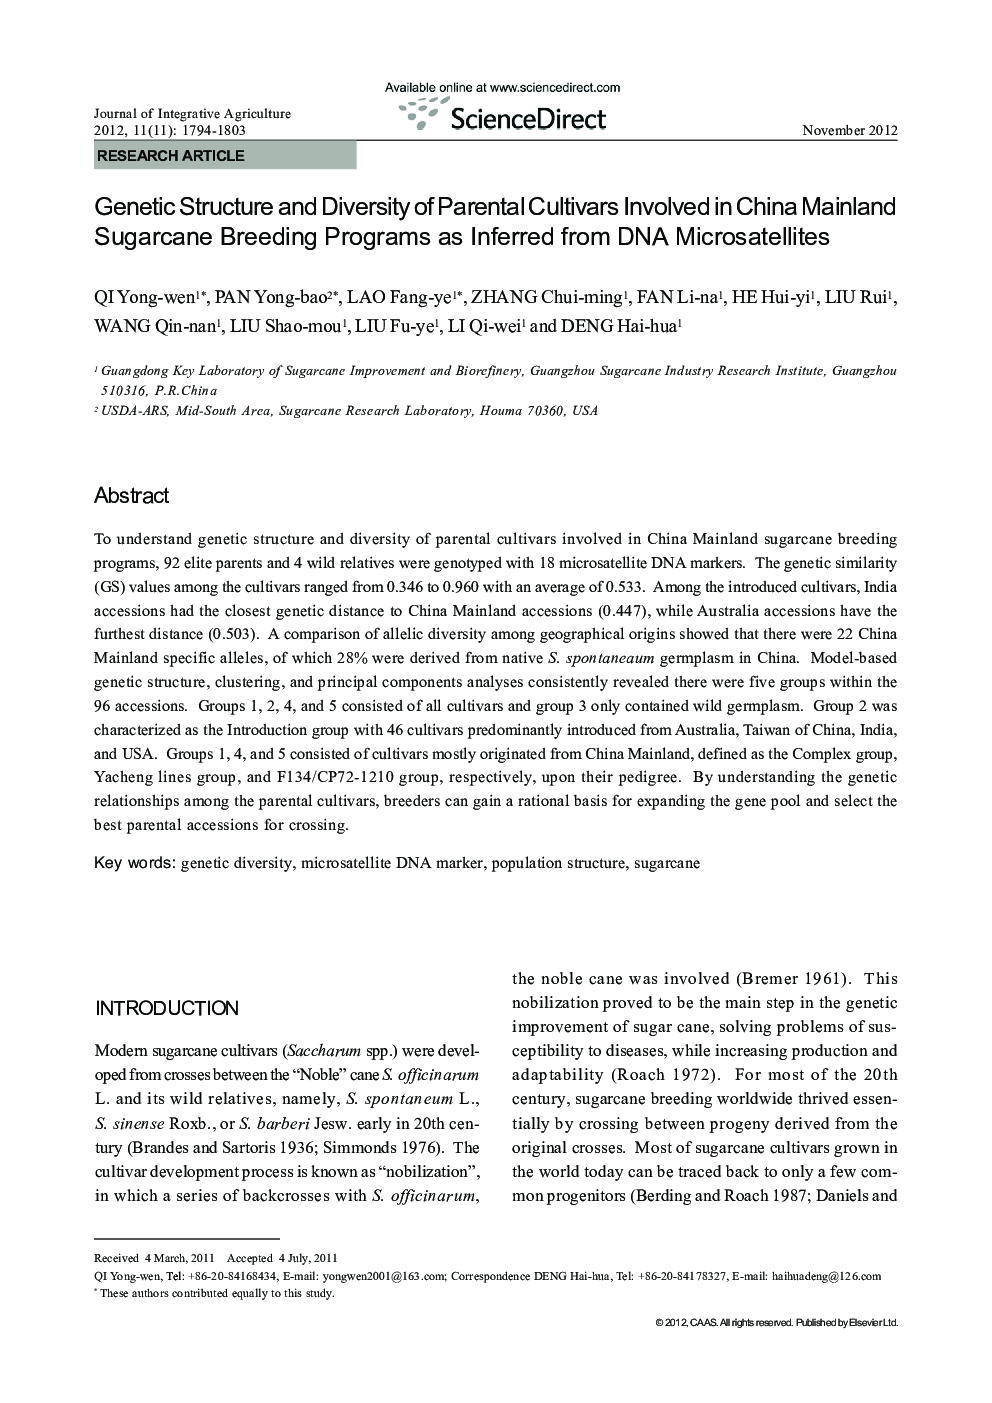 Genetic Structure and Diversity of Parental Cultivars Involved in China Mainland Sugarcane Breeding Programs as Inferred from DNA Microsatellites